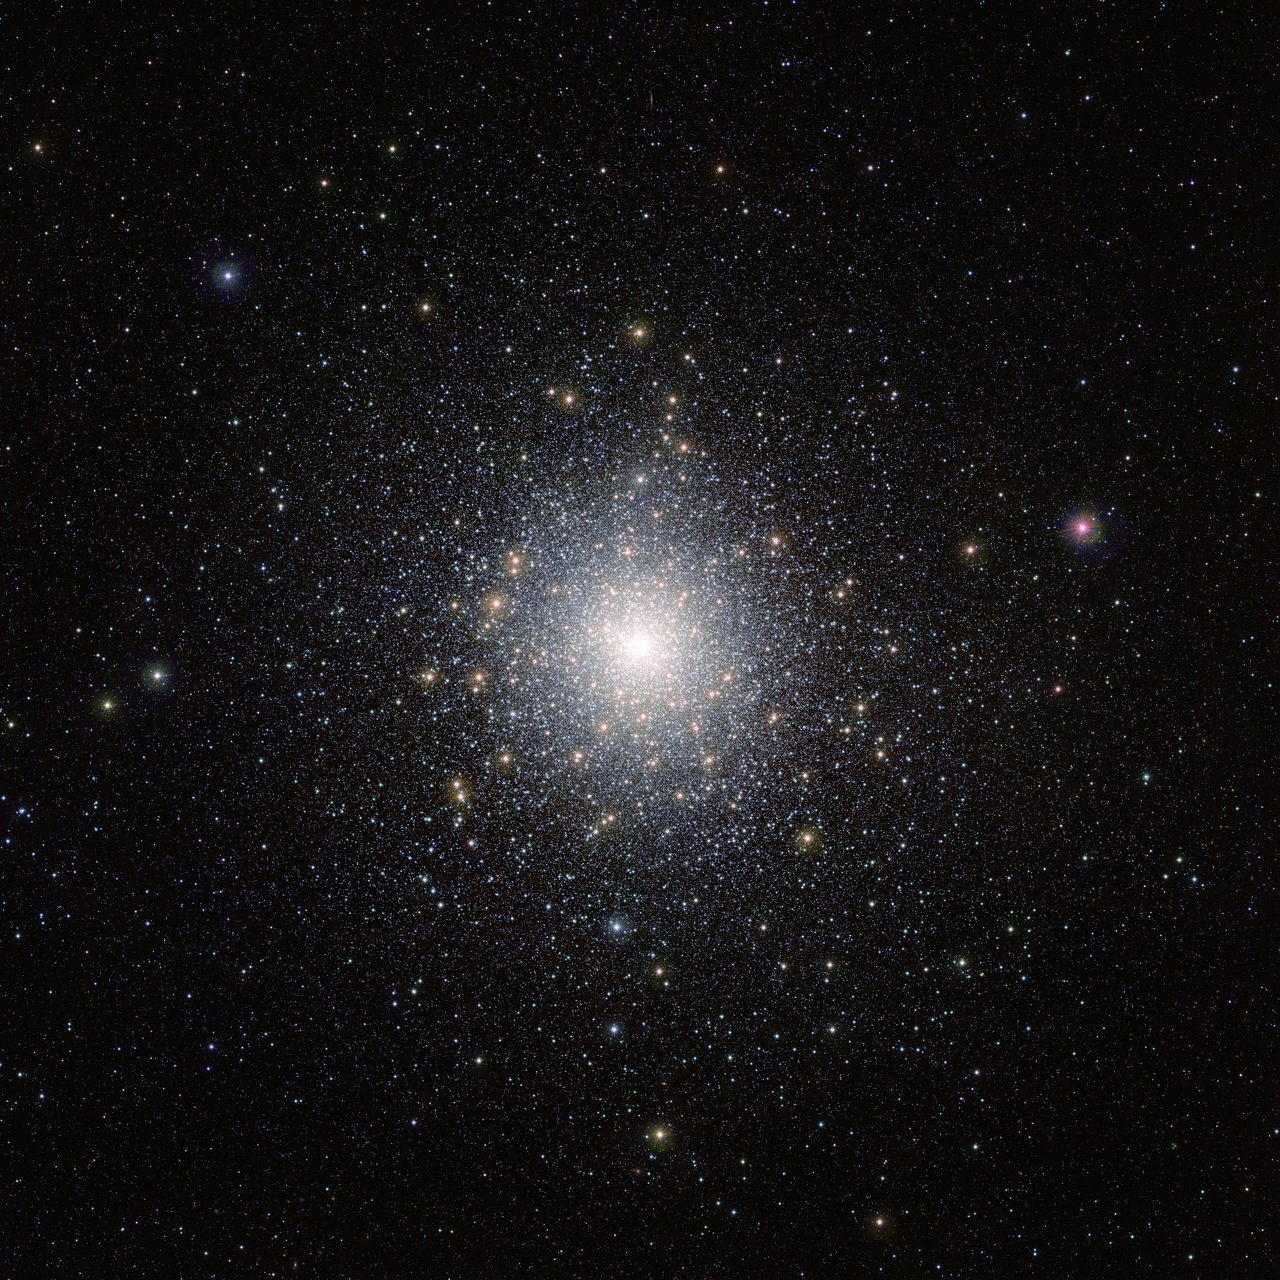 http://www.eso.org/public/archives/images/screen/eso1302a.jpg